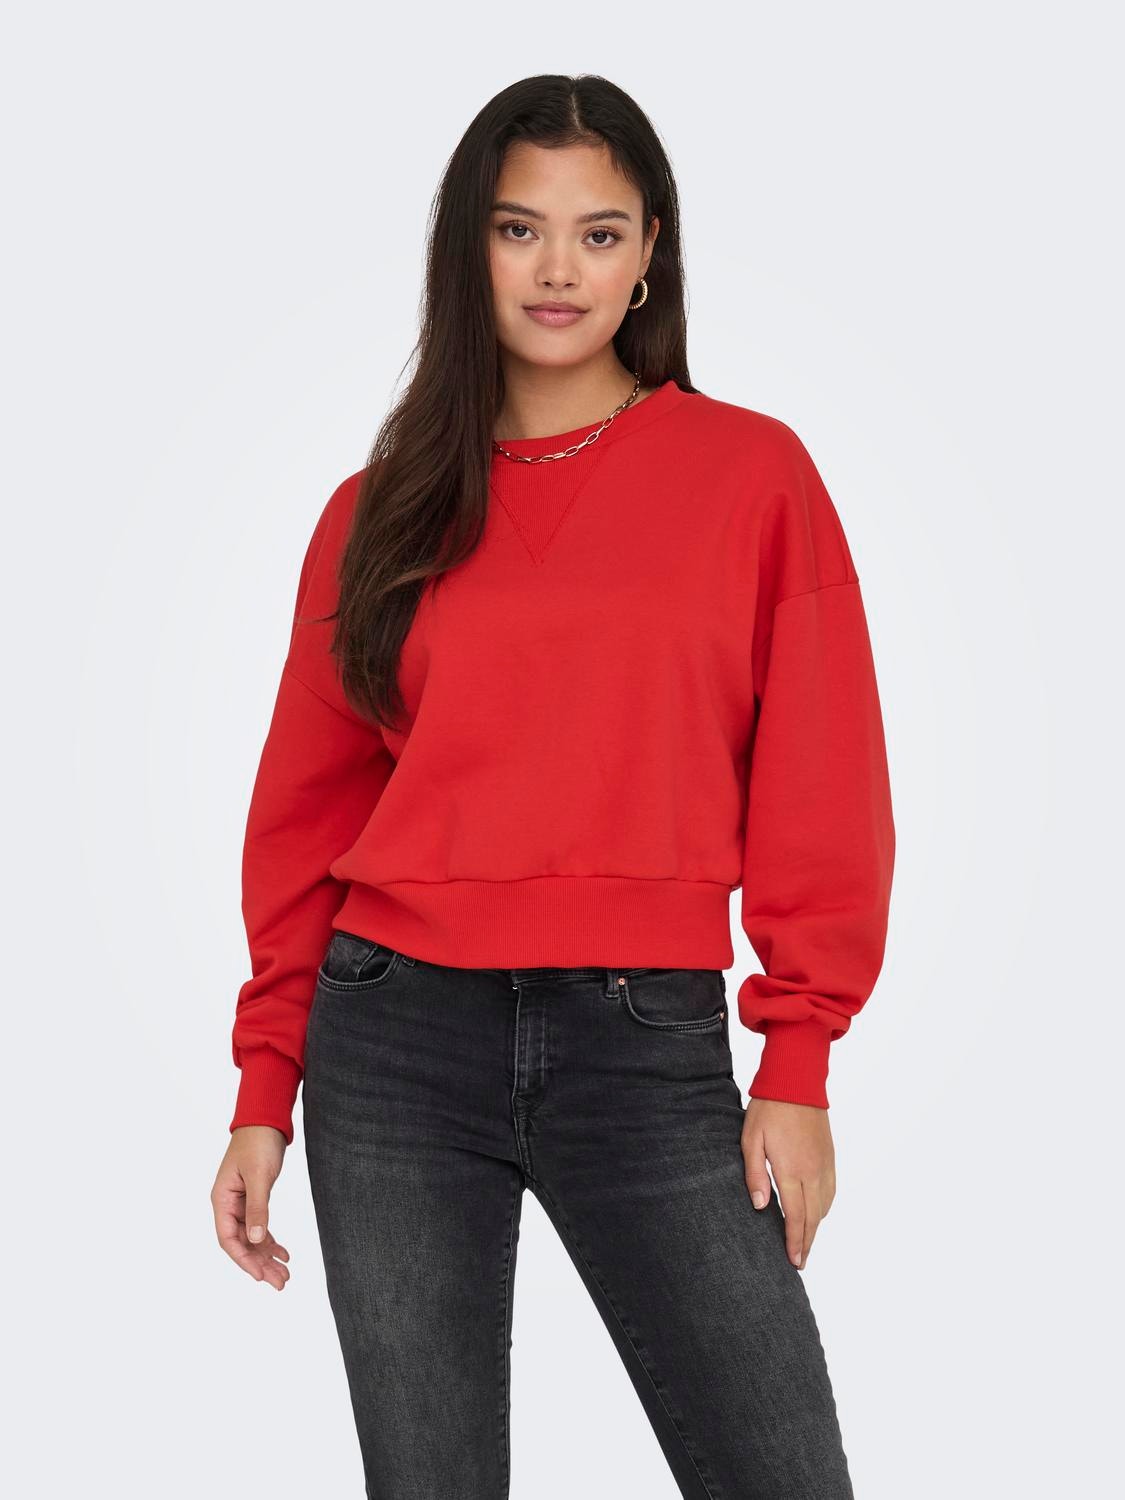 ONLY Solid colored o-neck sweatshirt -Flame Scarlet - 15315408